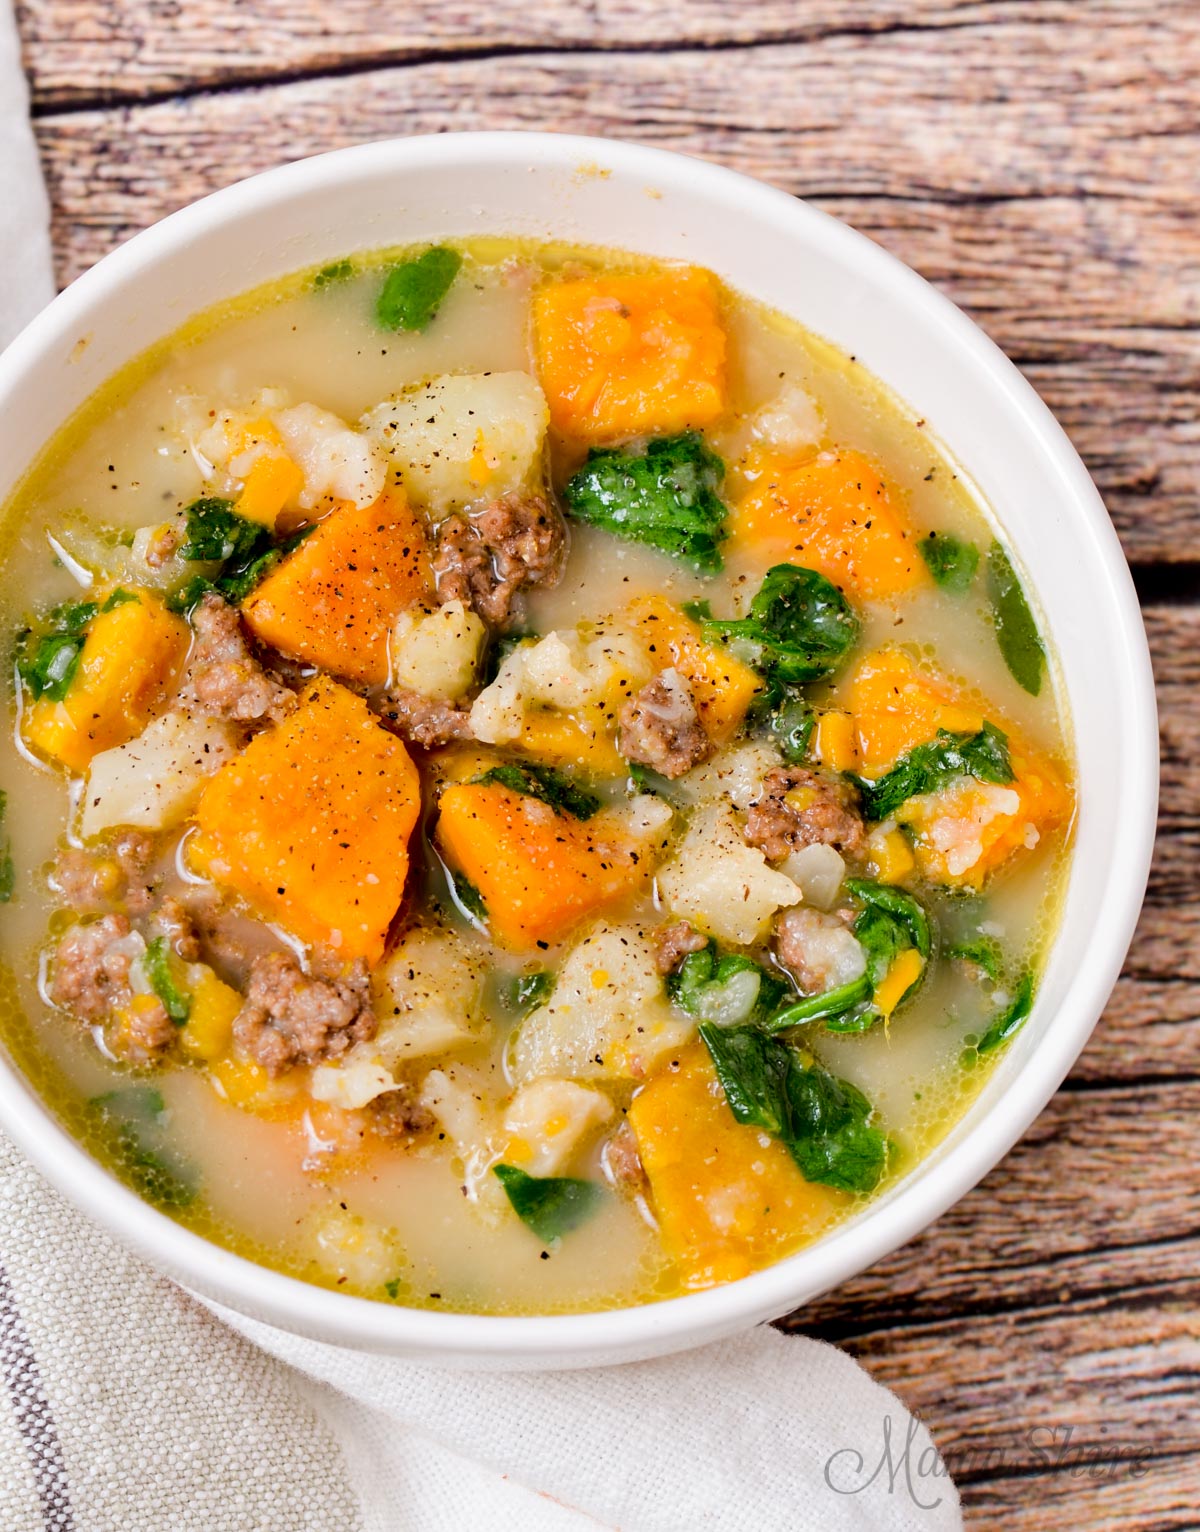 A delicious bowl of beef & sweet potato chowder.